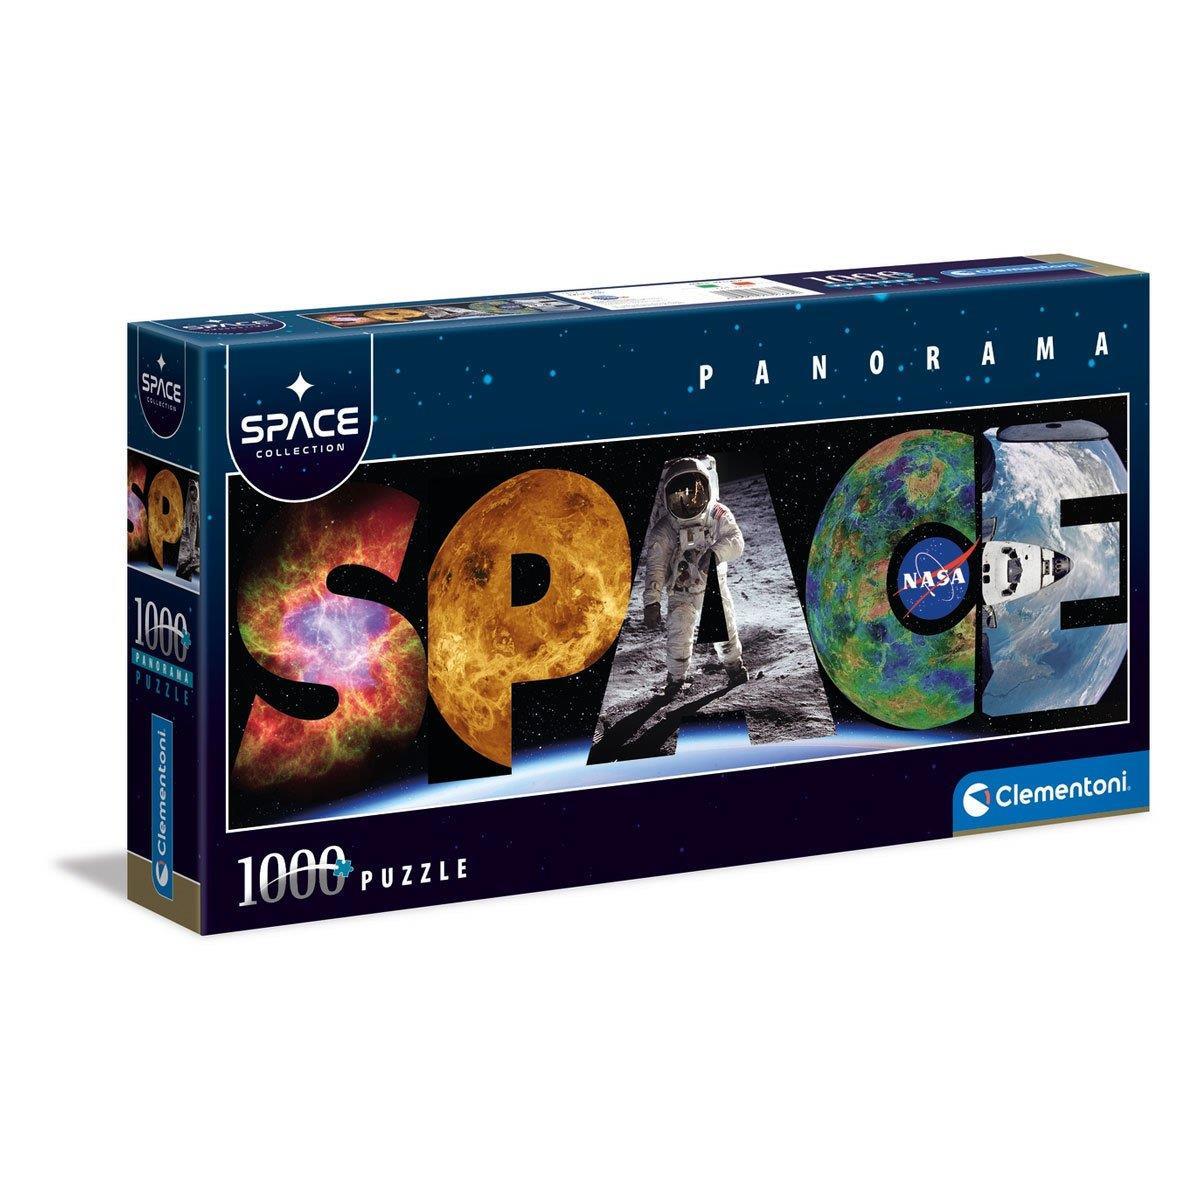 Clementoni Puzzle 1000 Panorama Space Collection 39638